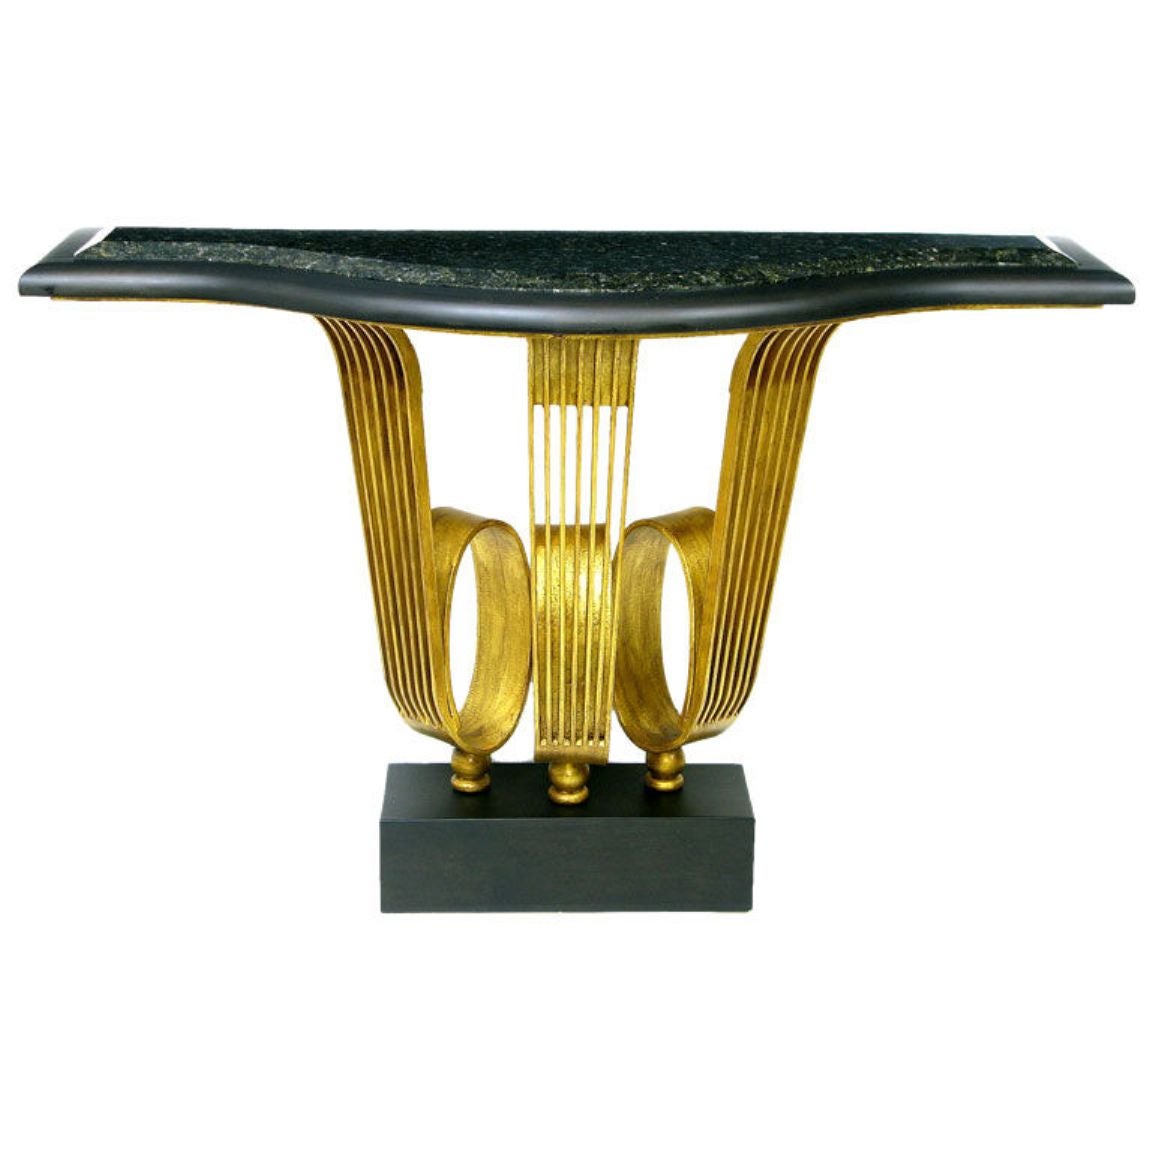 Emile-Jacques Ruhlmann-Inspired Gilt & Granite Console Table By Edward Leisner